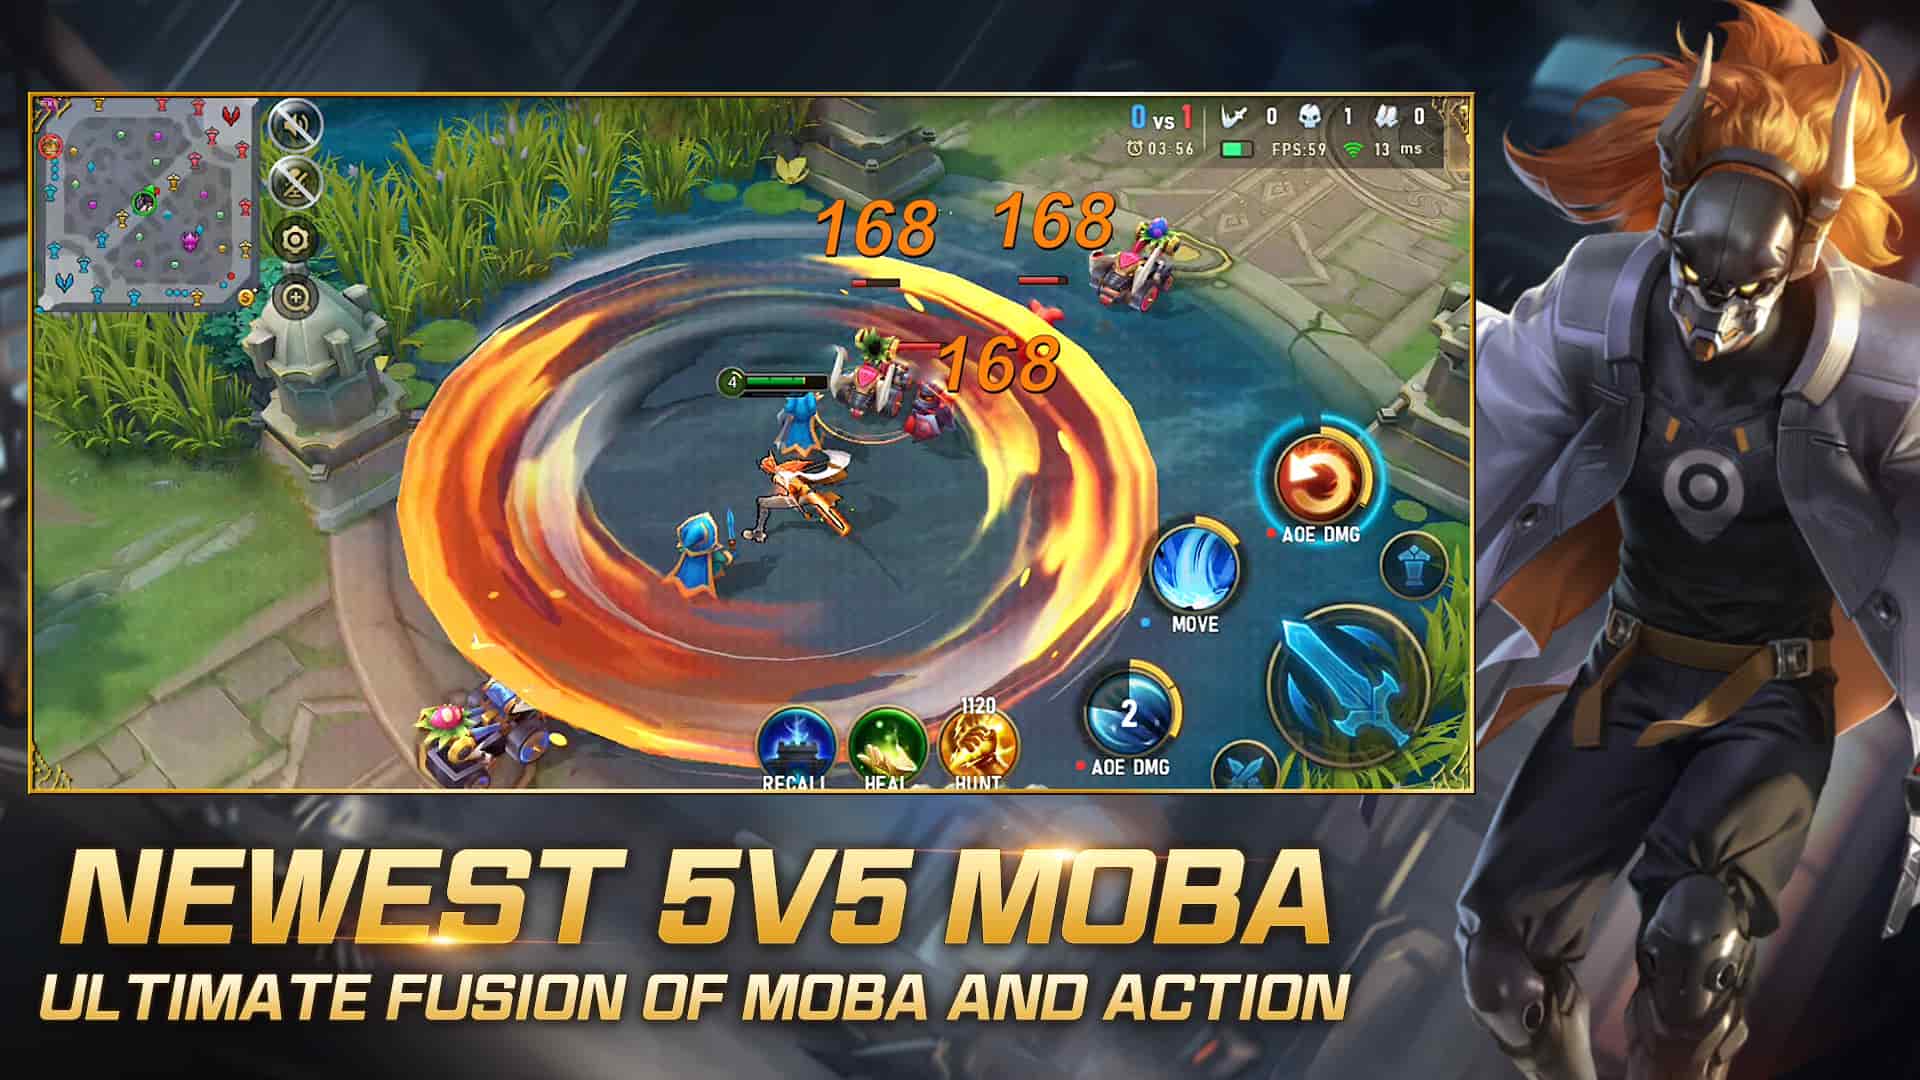 MOBILE LEGENDS PC BETA TEST! SIGN UP TODAY! 